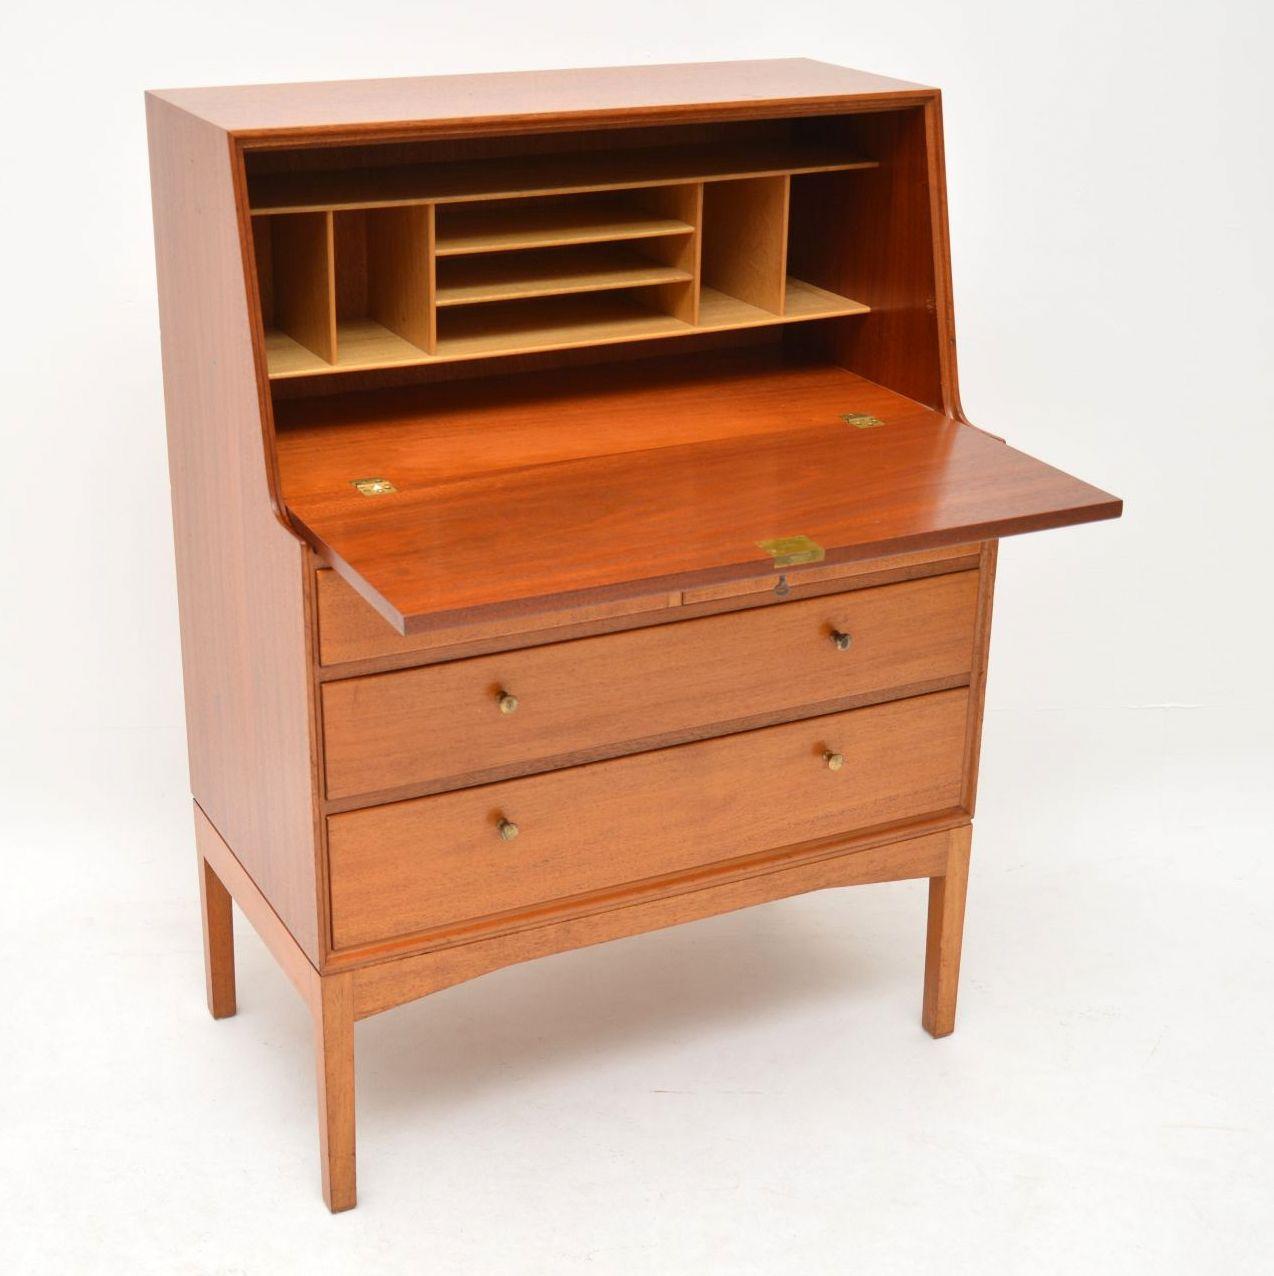 A stylish, extremely well made and very rare vintage bureau in teak, this was designed by John Morton and was made by LM furniture in the 1960s. It’s in superb condition for its age, with only some extremely minor wear here and there. This is clean,